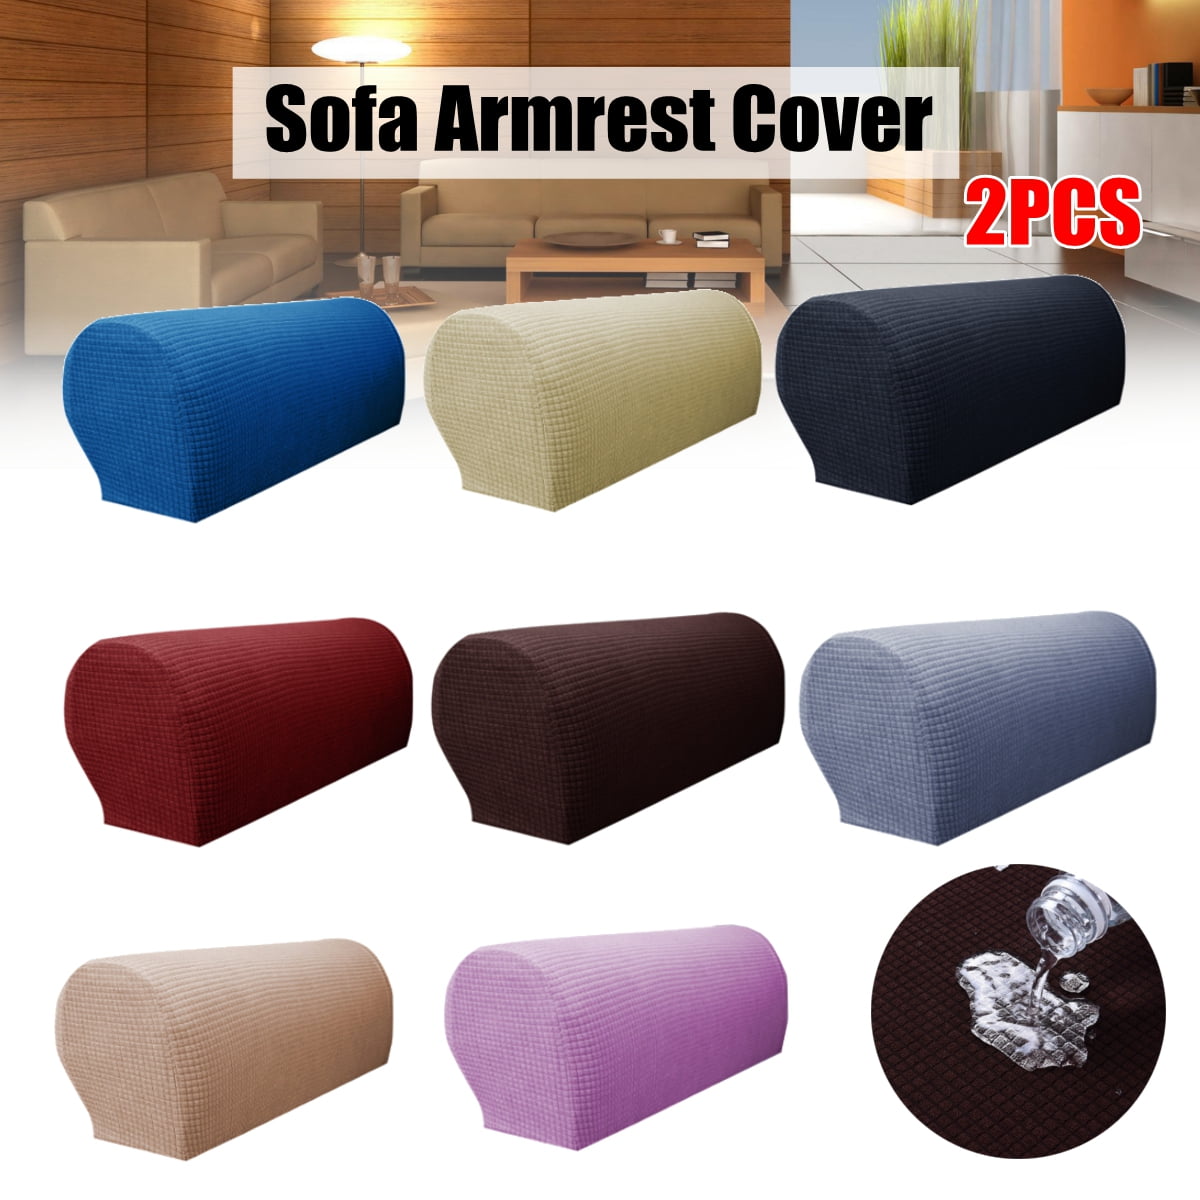 2Pcs Removable Sofa Armrest Covers Stretchy Couch Arm Chair Protector US Stock 